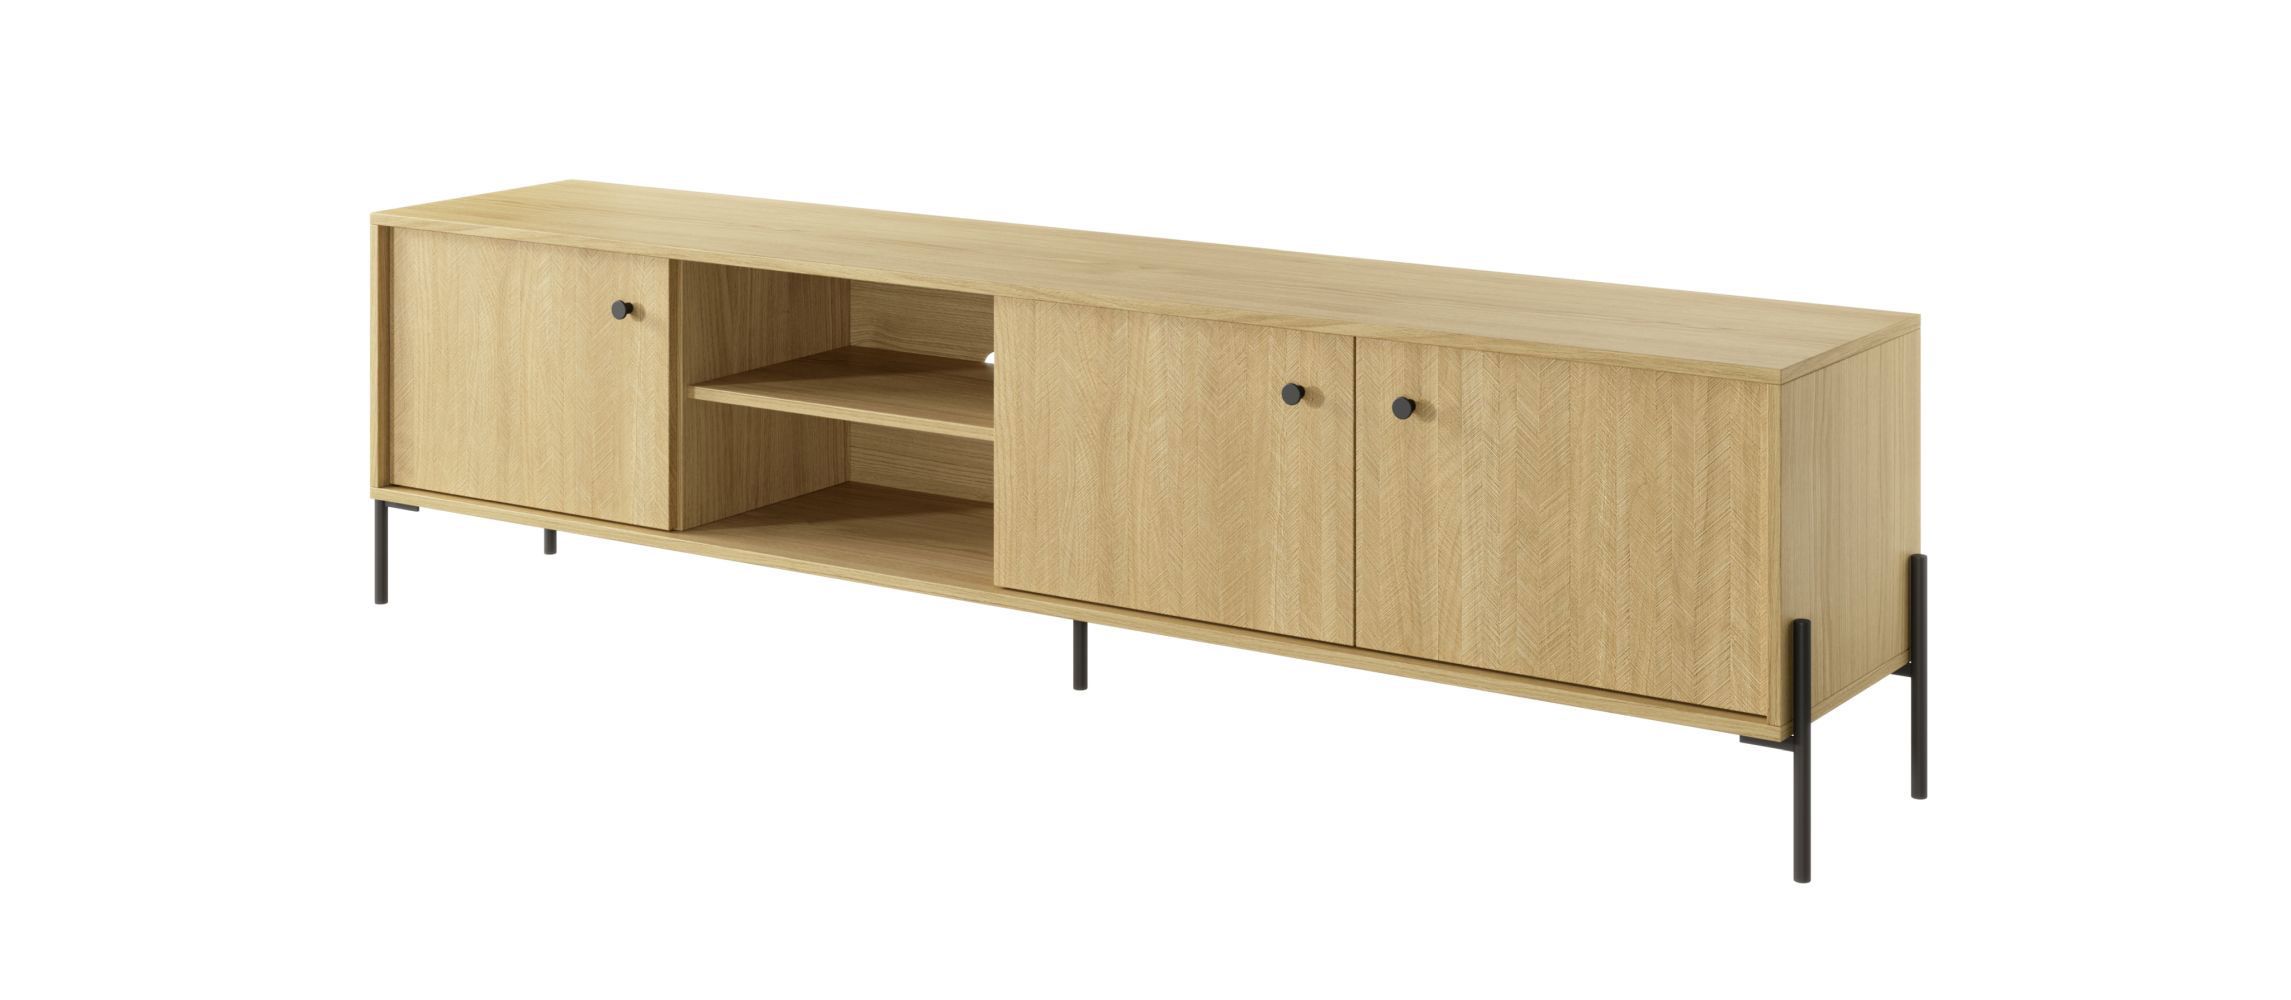 Timeless TV cabinet with three doors Allegma 05, color: Scandi oak - Dimensions: 53 x 207 x 39.5 cm (H x W x D)